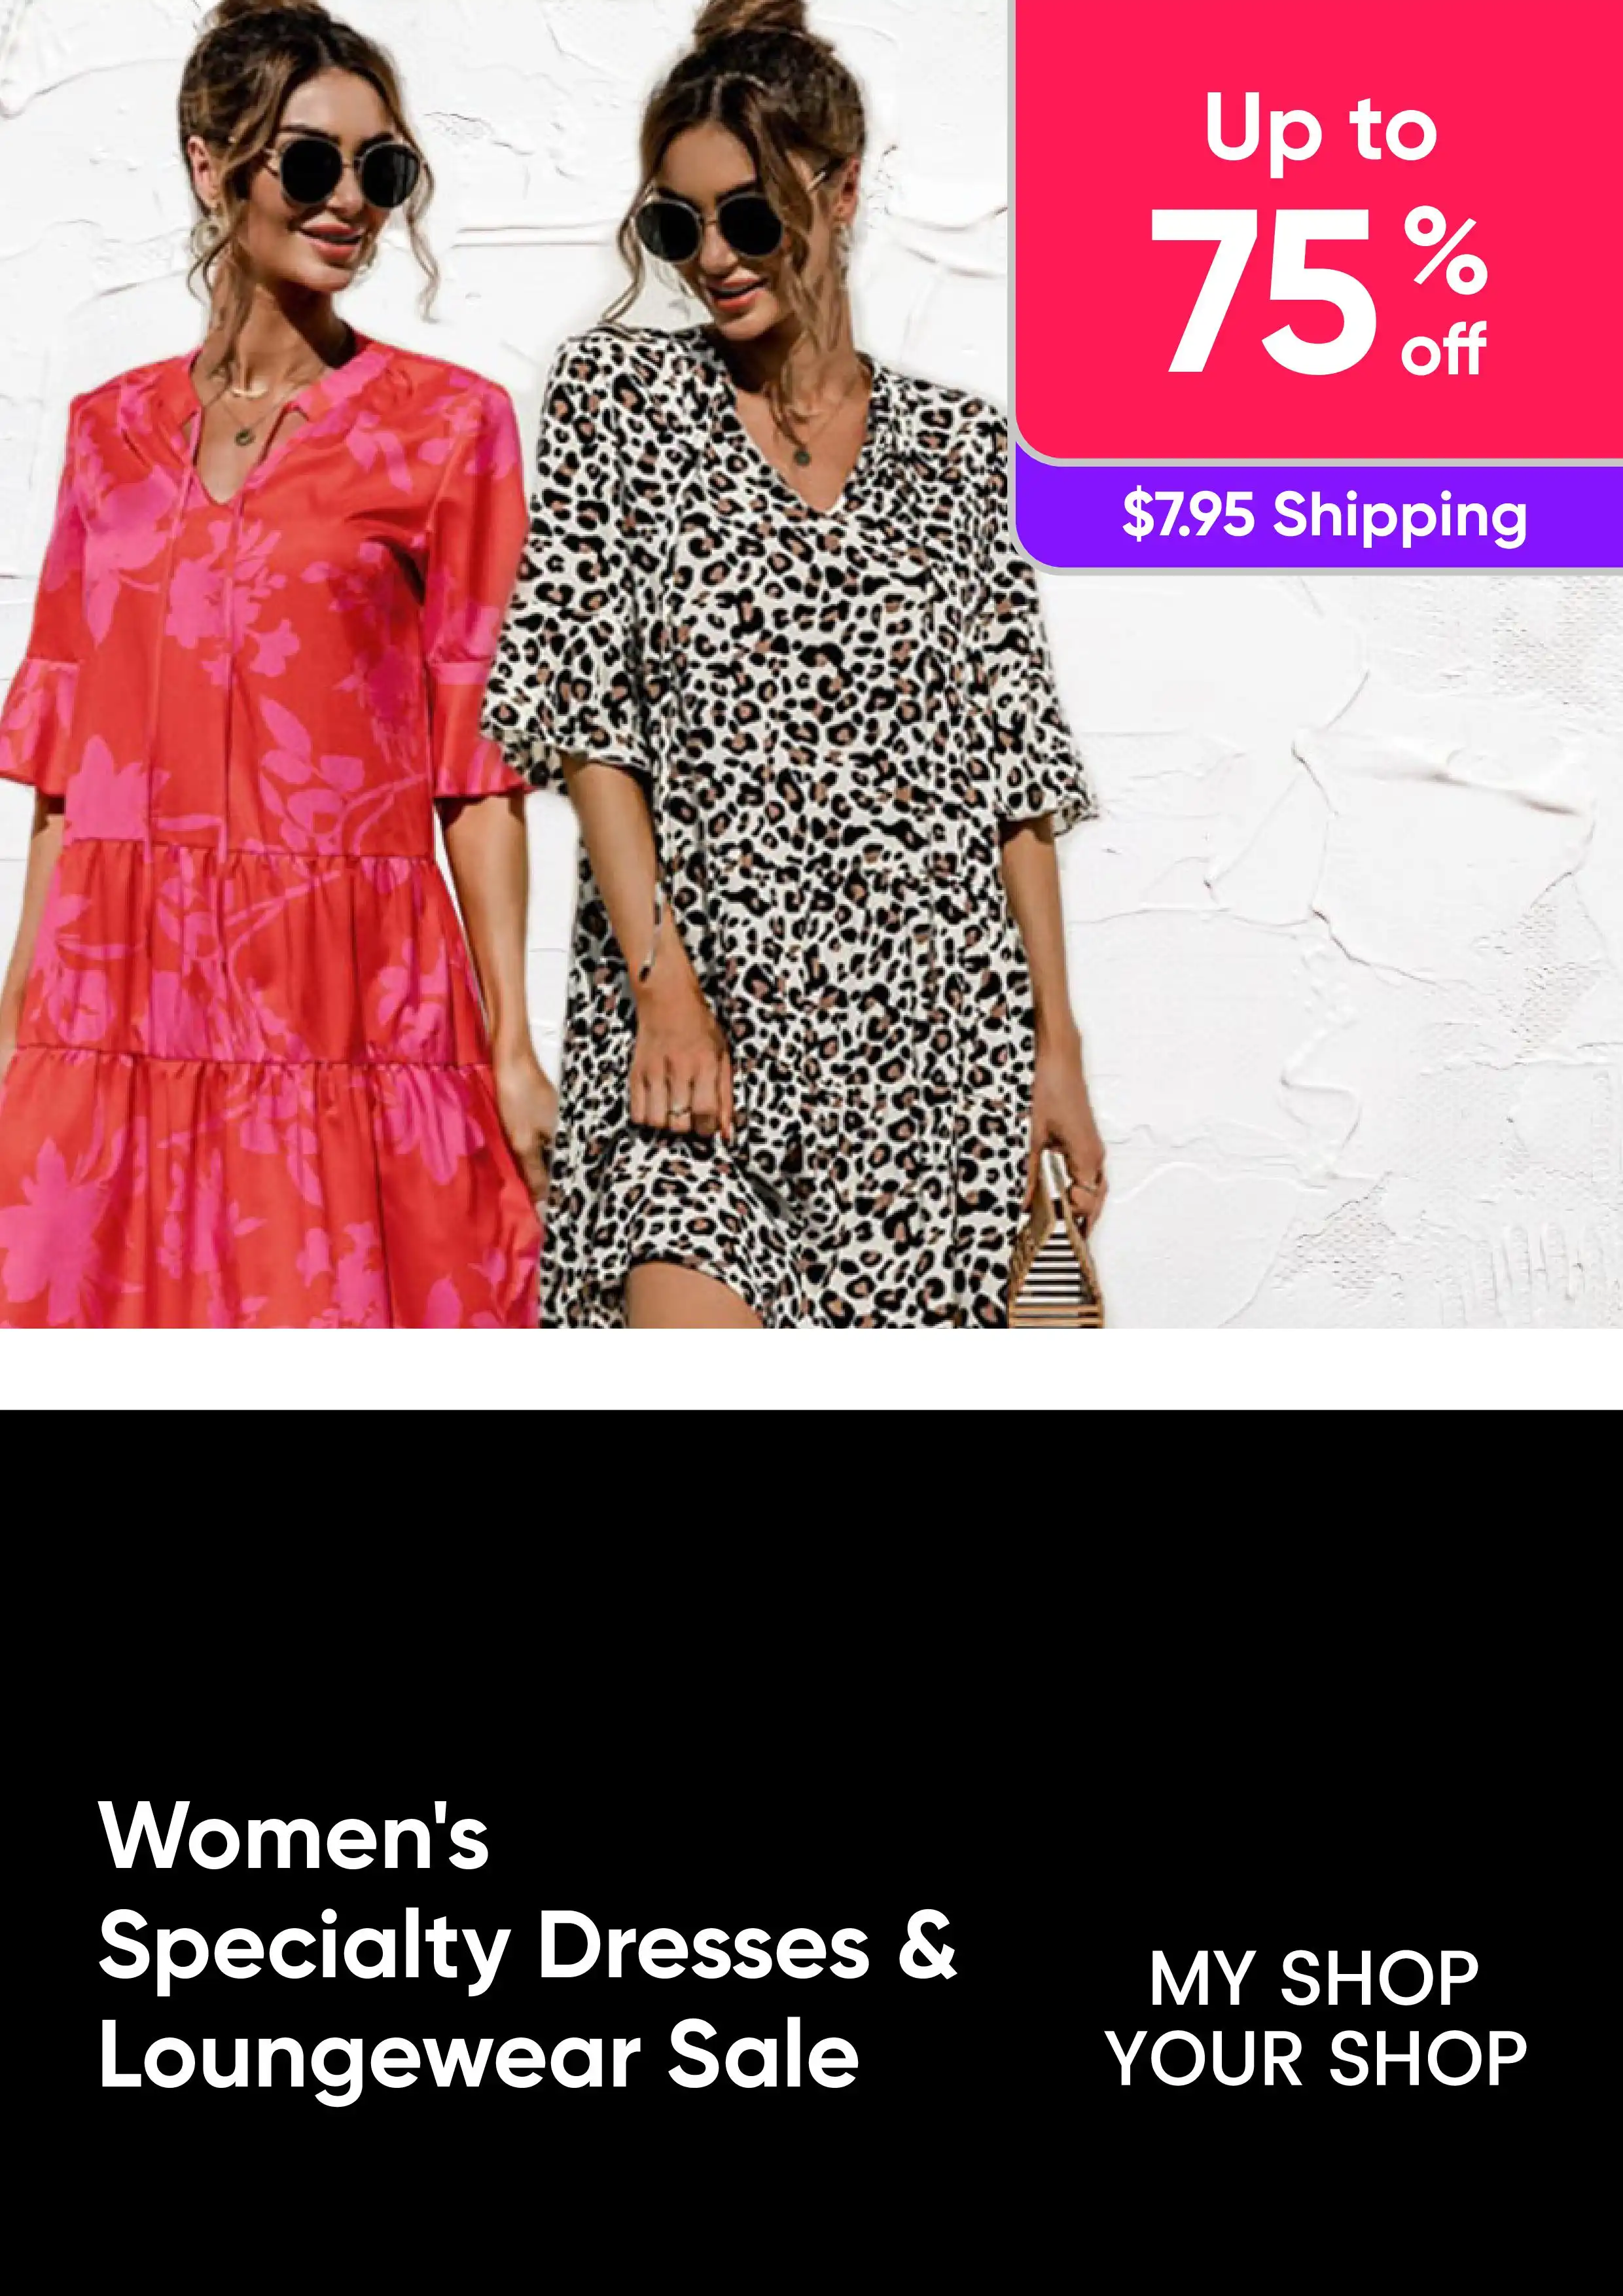 Women's Specialty Dresses and Loungewear - Save up to 75% Off 